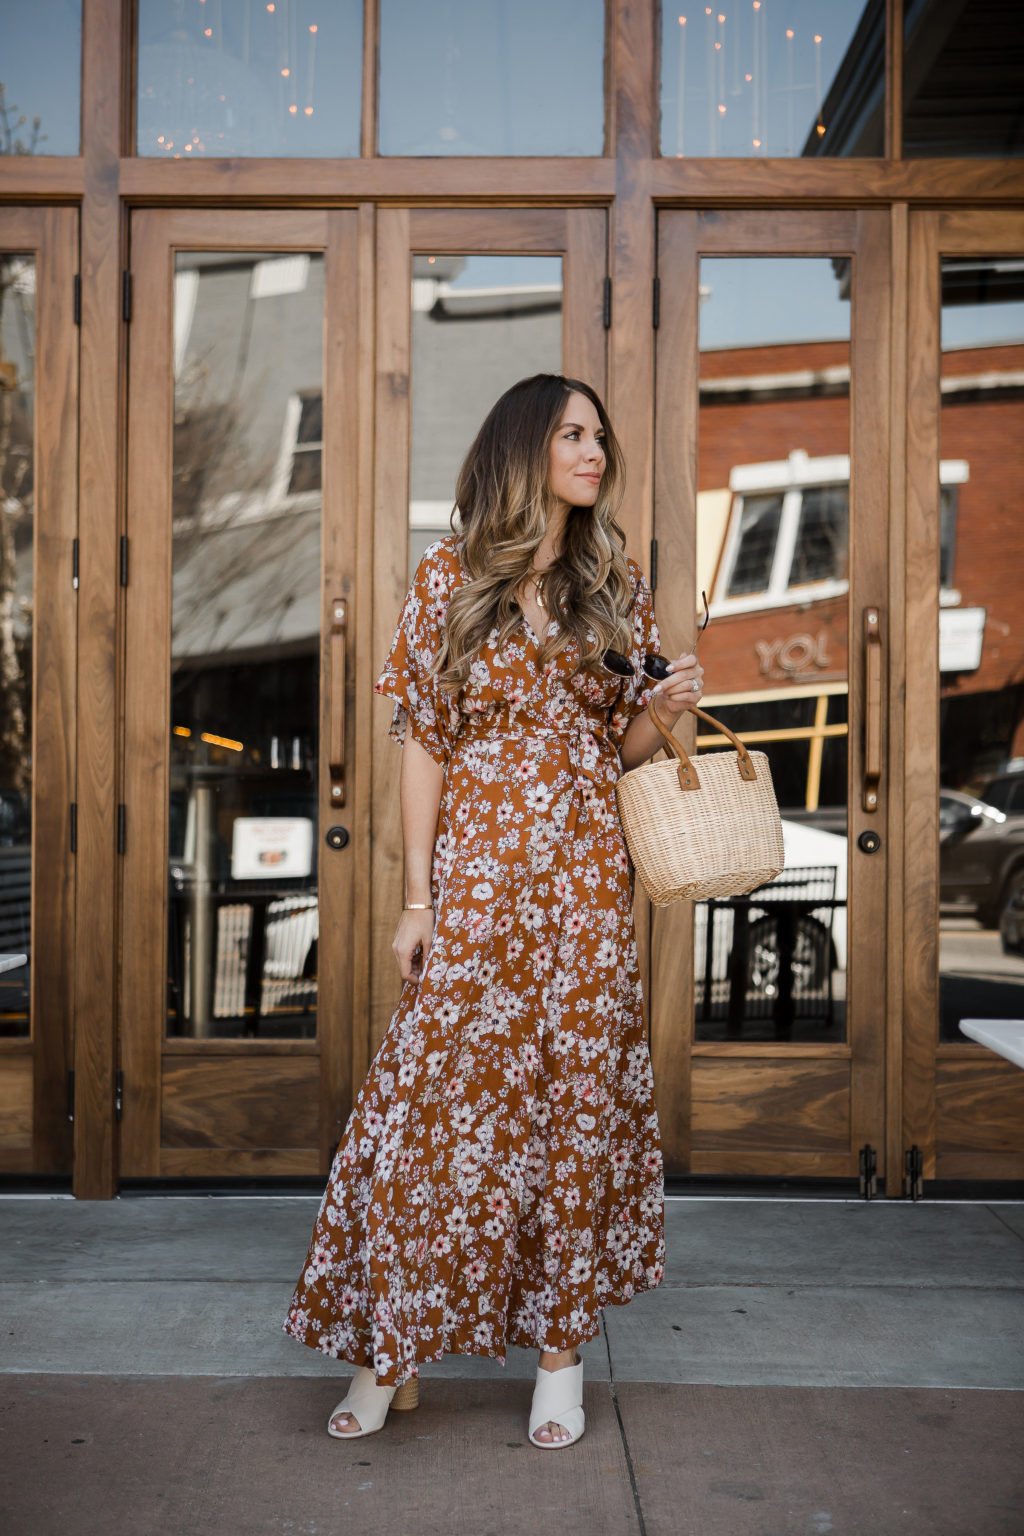 5 Floral Maxi Dresses to Wear this Spring and Summer